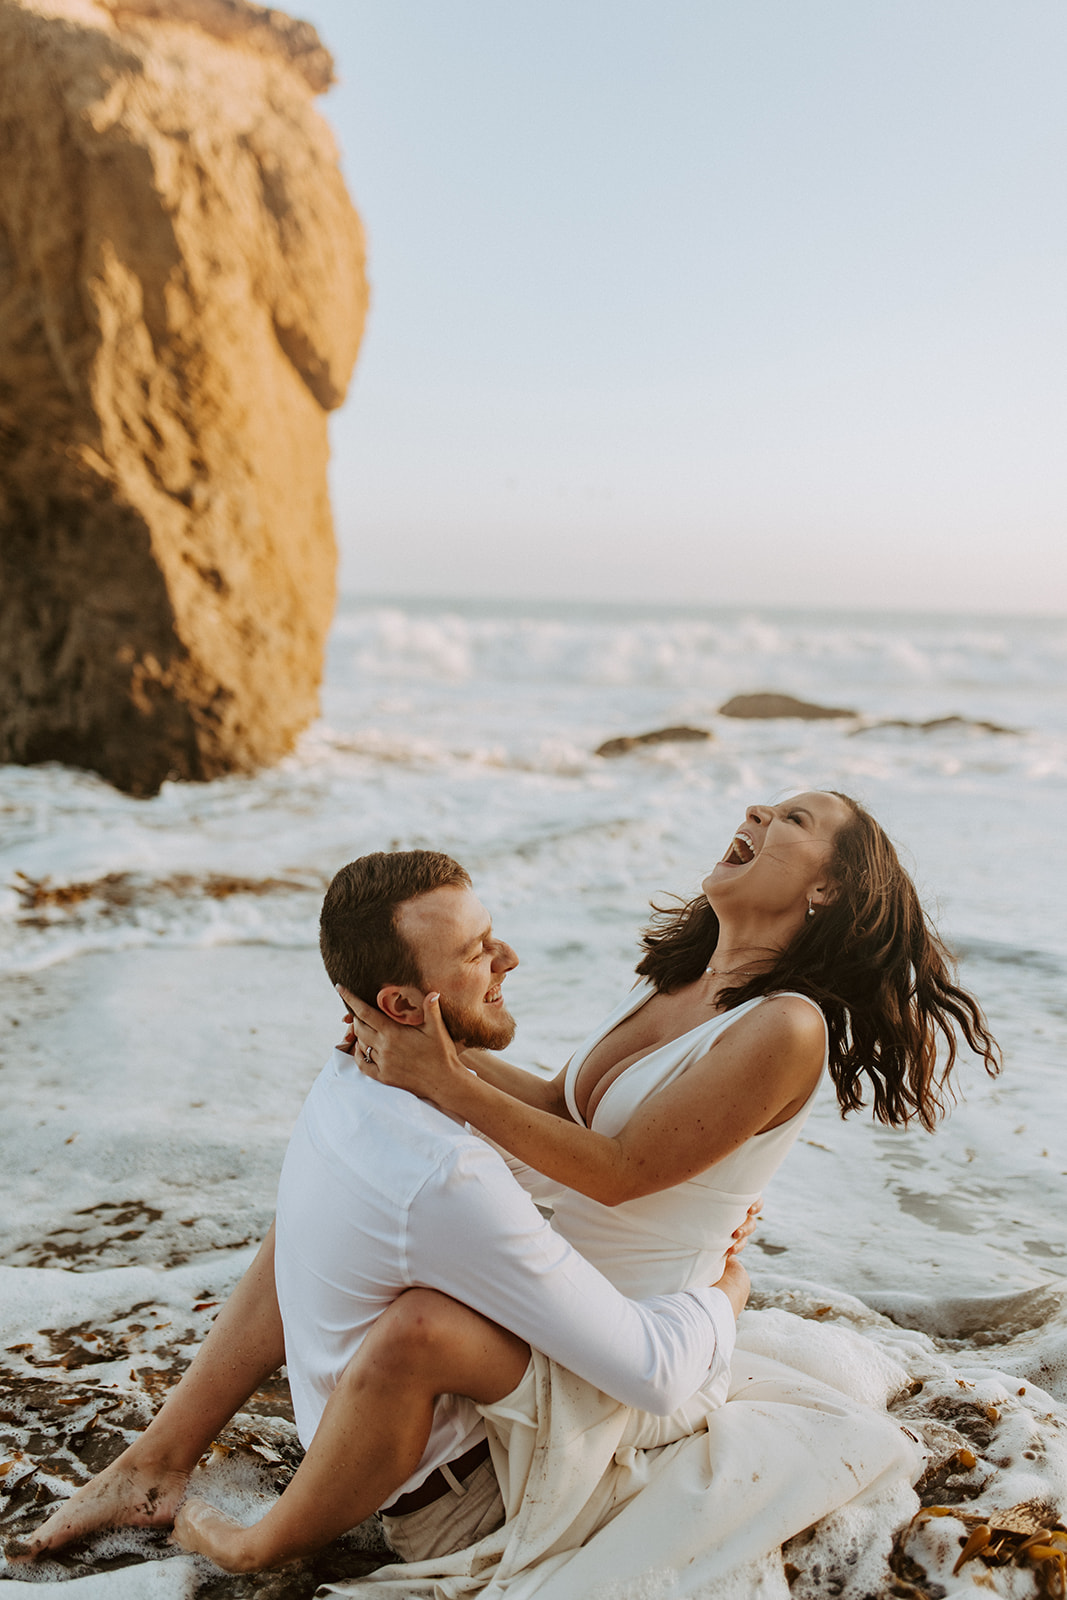 5 Places To Elope In California From A California Elopement Photographer